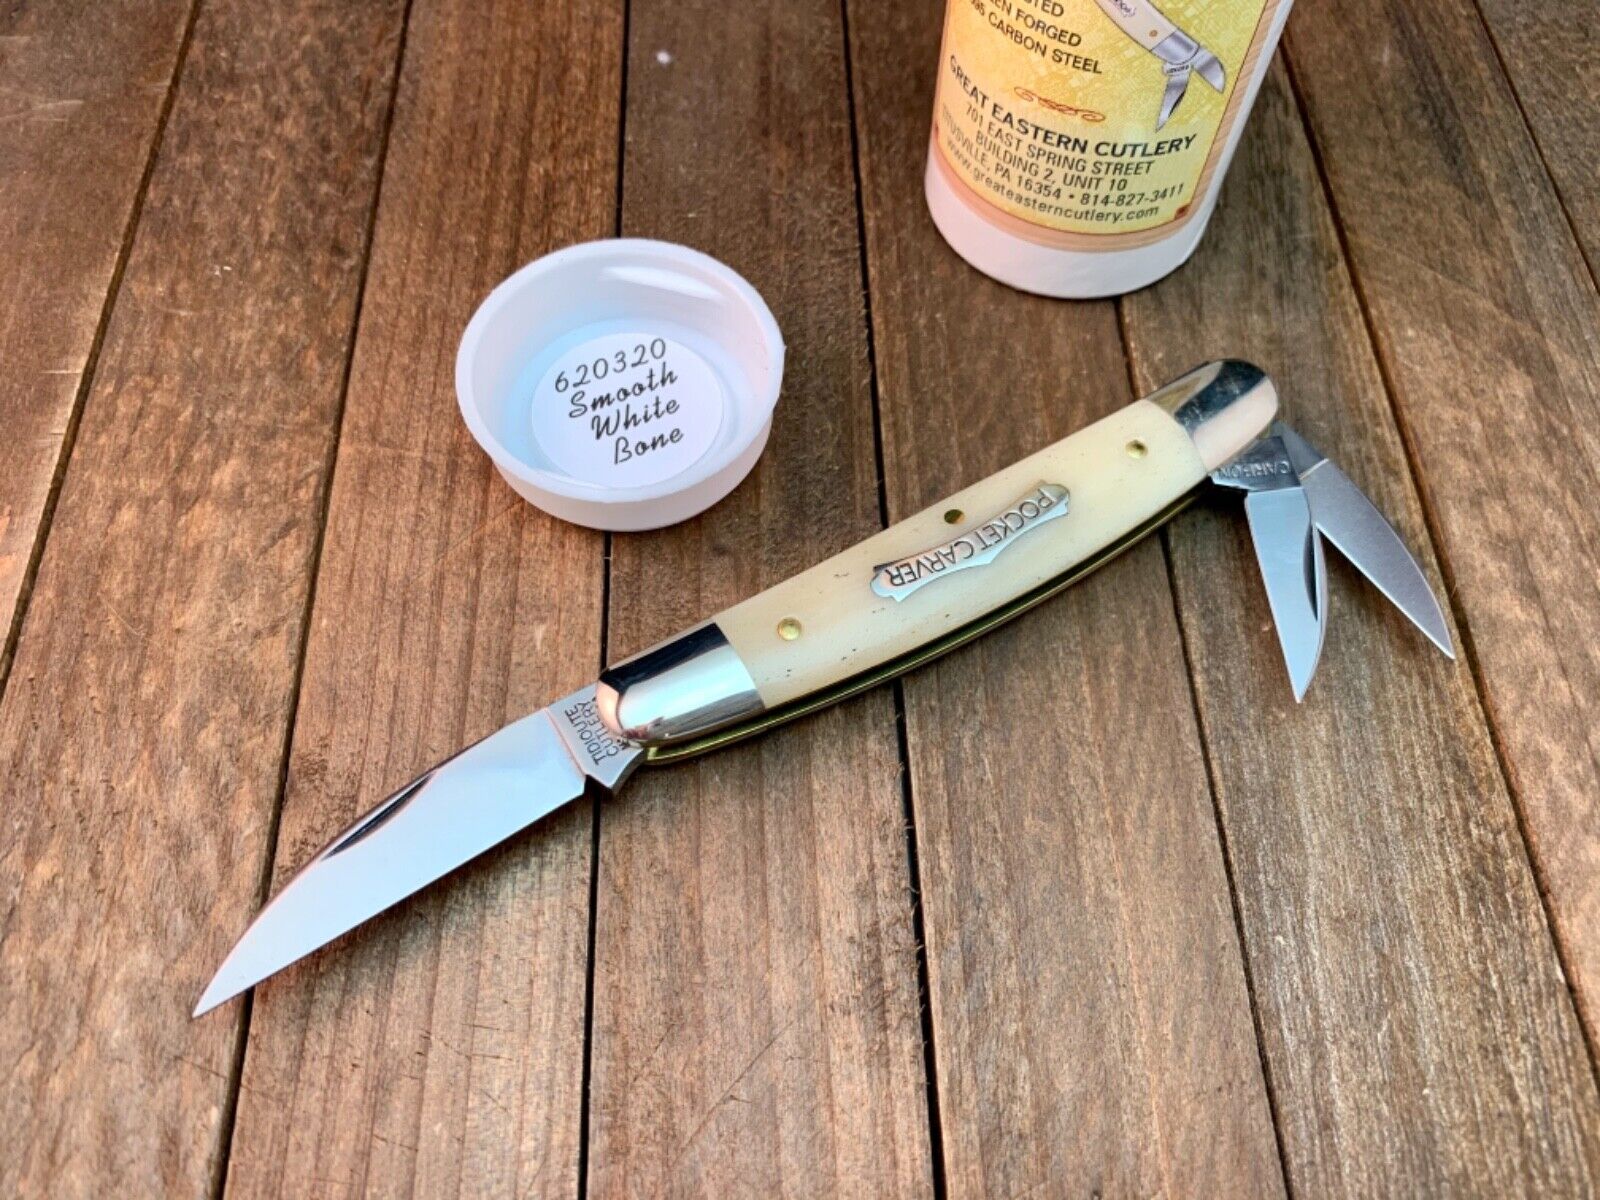 Great Eastern Cutlery Tidioute Knife Pocket Carver 62 Smooth White 